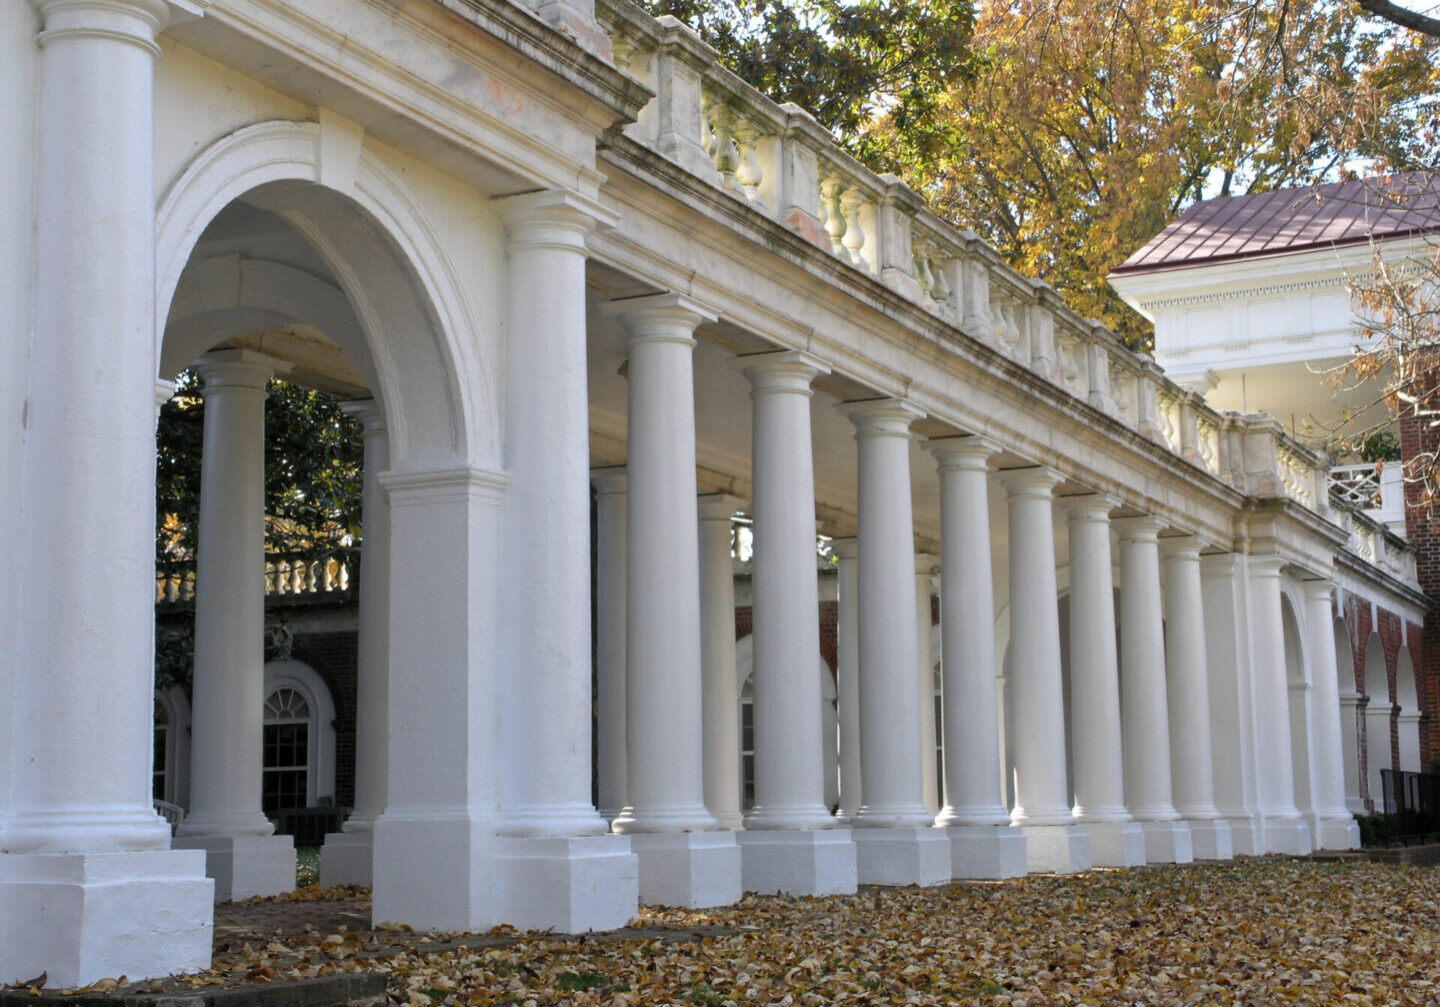 Columned walkway that is part of Thomas Jeffersons Rotunda on the campus of the University of Virginia, Charolottesville,  United States of America.